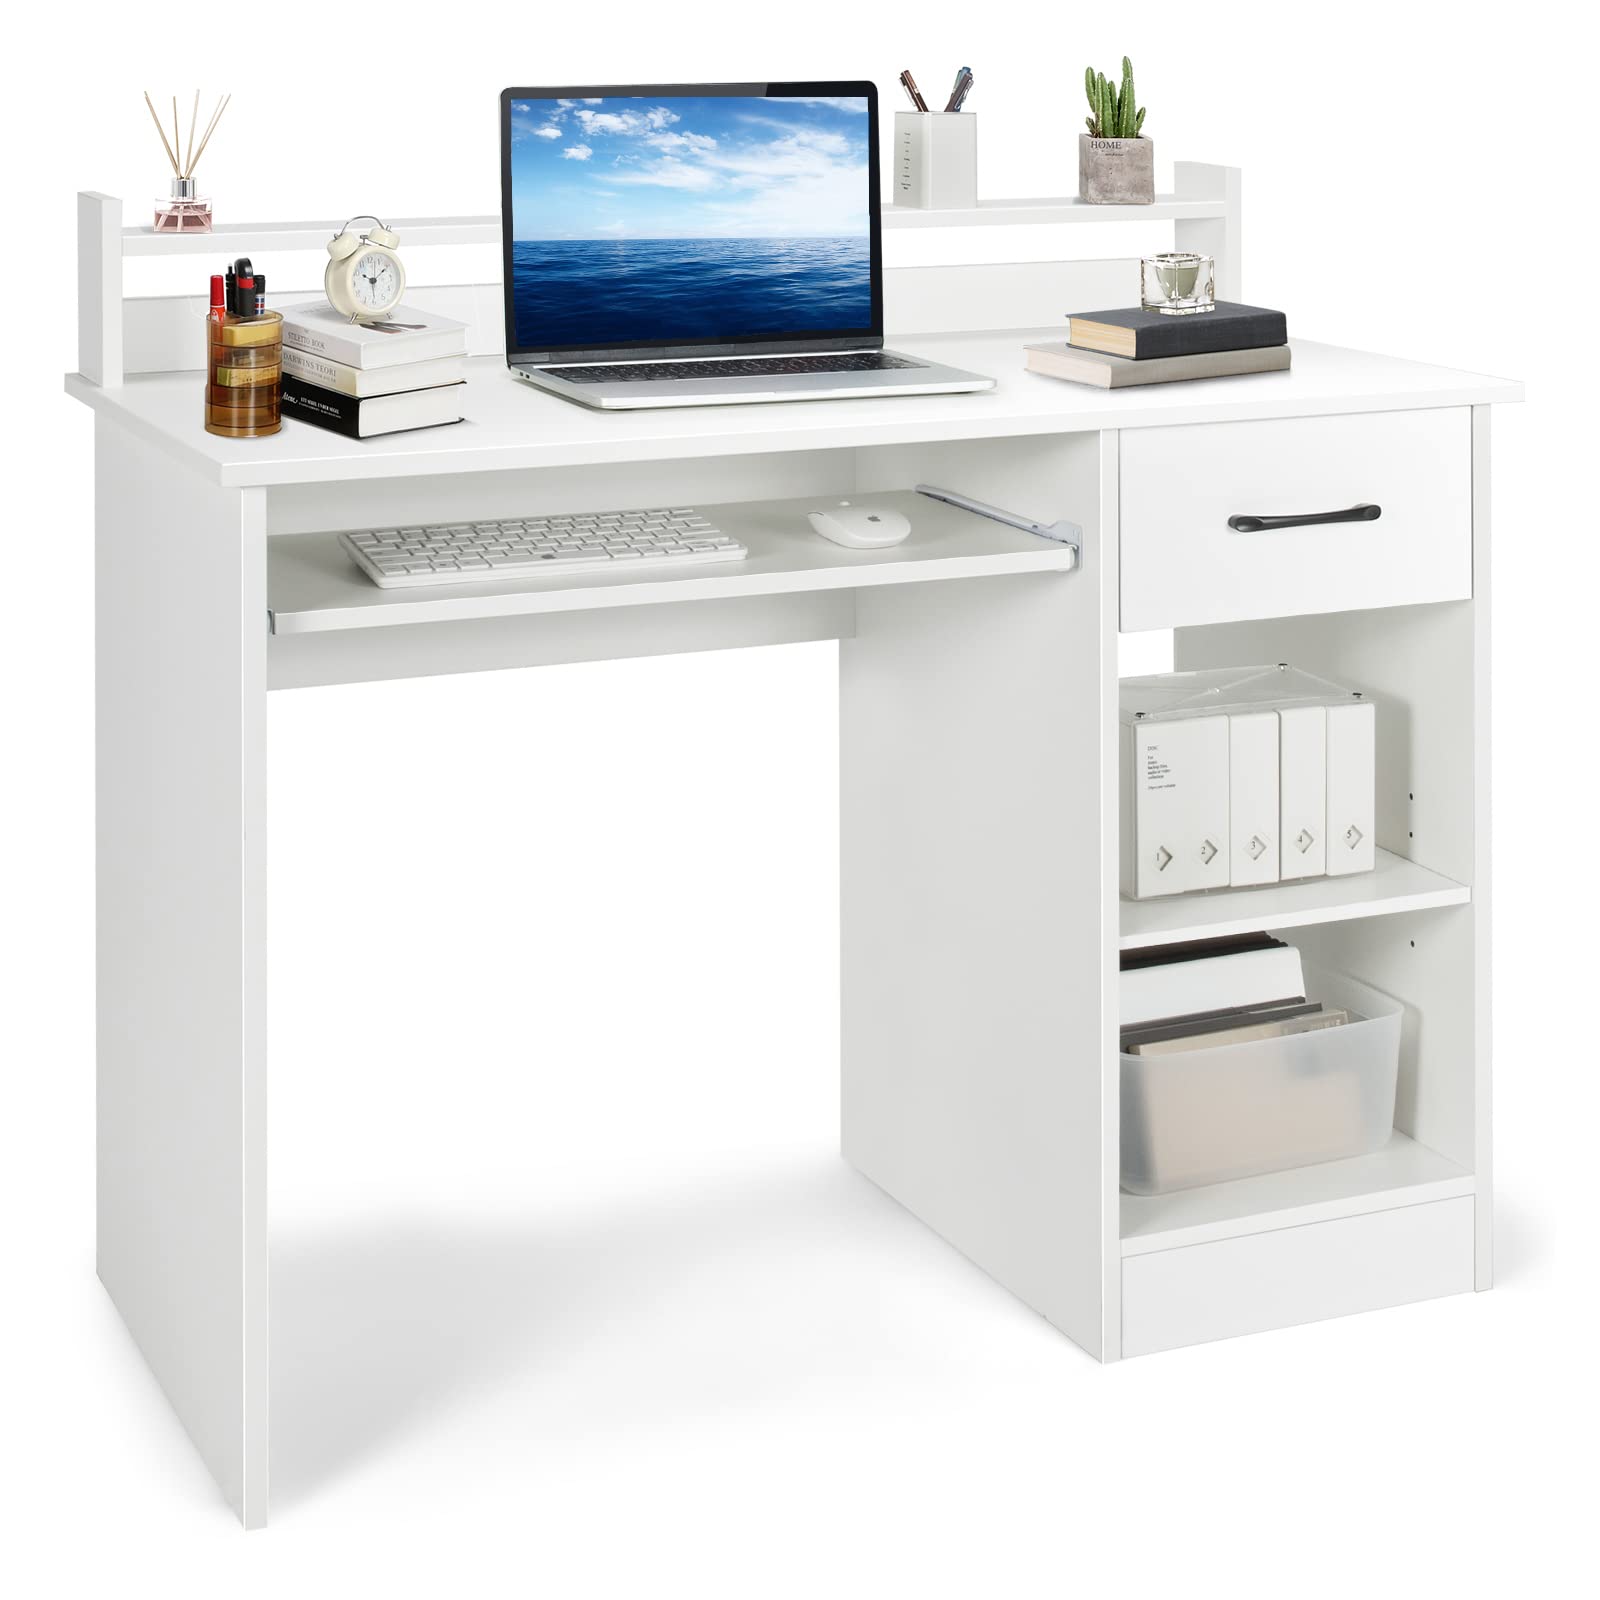 SILKYDRY Computer Desk with Hutch & Keyboard Tray, Home Office Workstation with Drawer, Adjustable Shelves, Modern Vanity Table for Bedroom, Wooden Writing Study Laptop PC Desk (White)